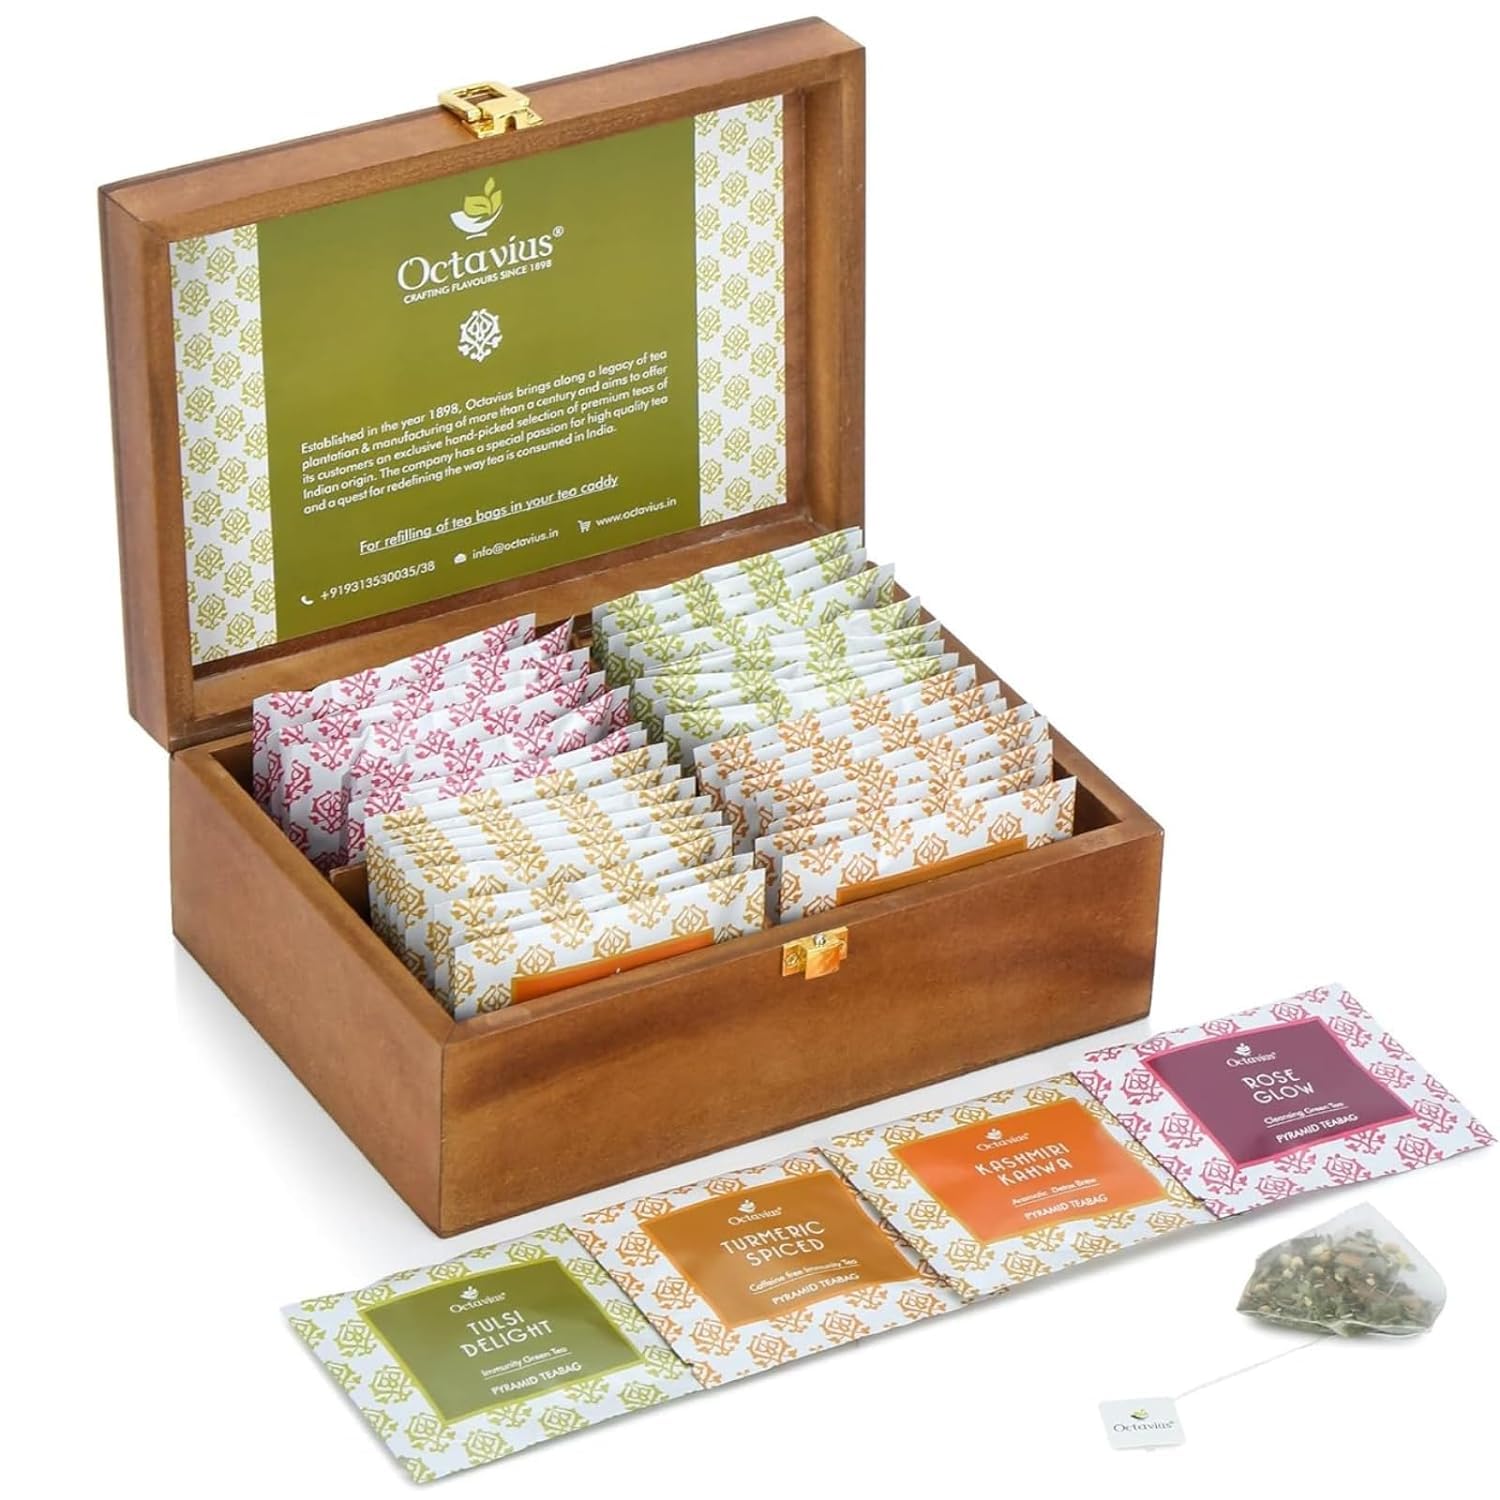 Good tea in a cute wood box. It' a great gift for a tea lover.